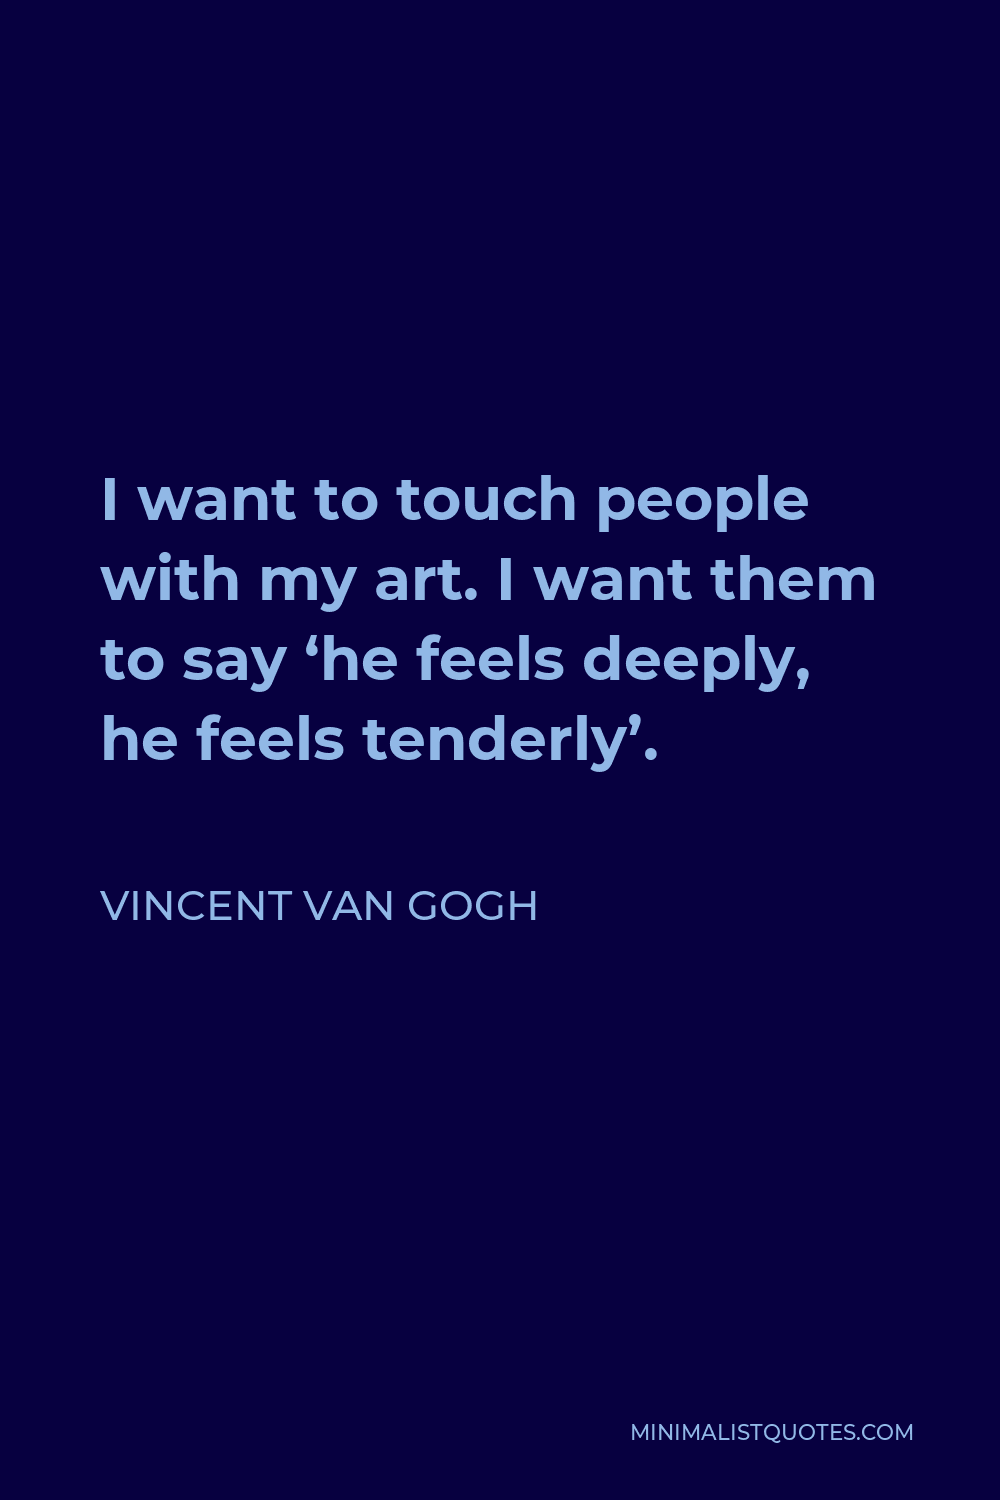 Vincent Van Gogh Quote - I want to touch people with my art. I want them to say ‘he feels deeply, he feels tenderly’.